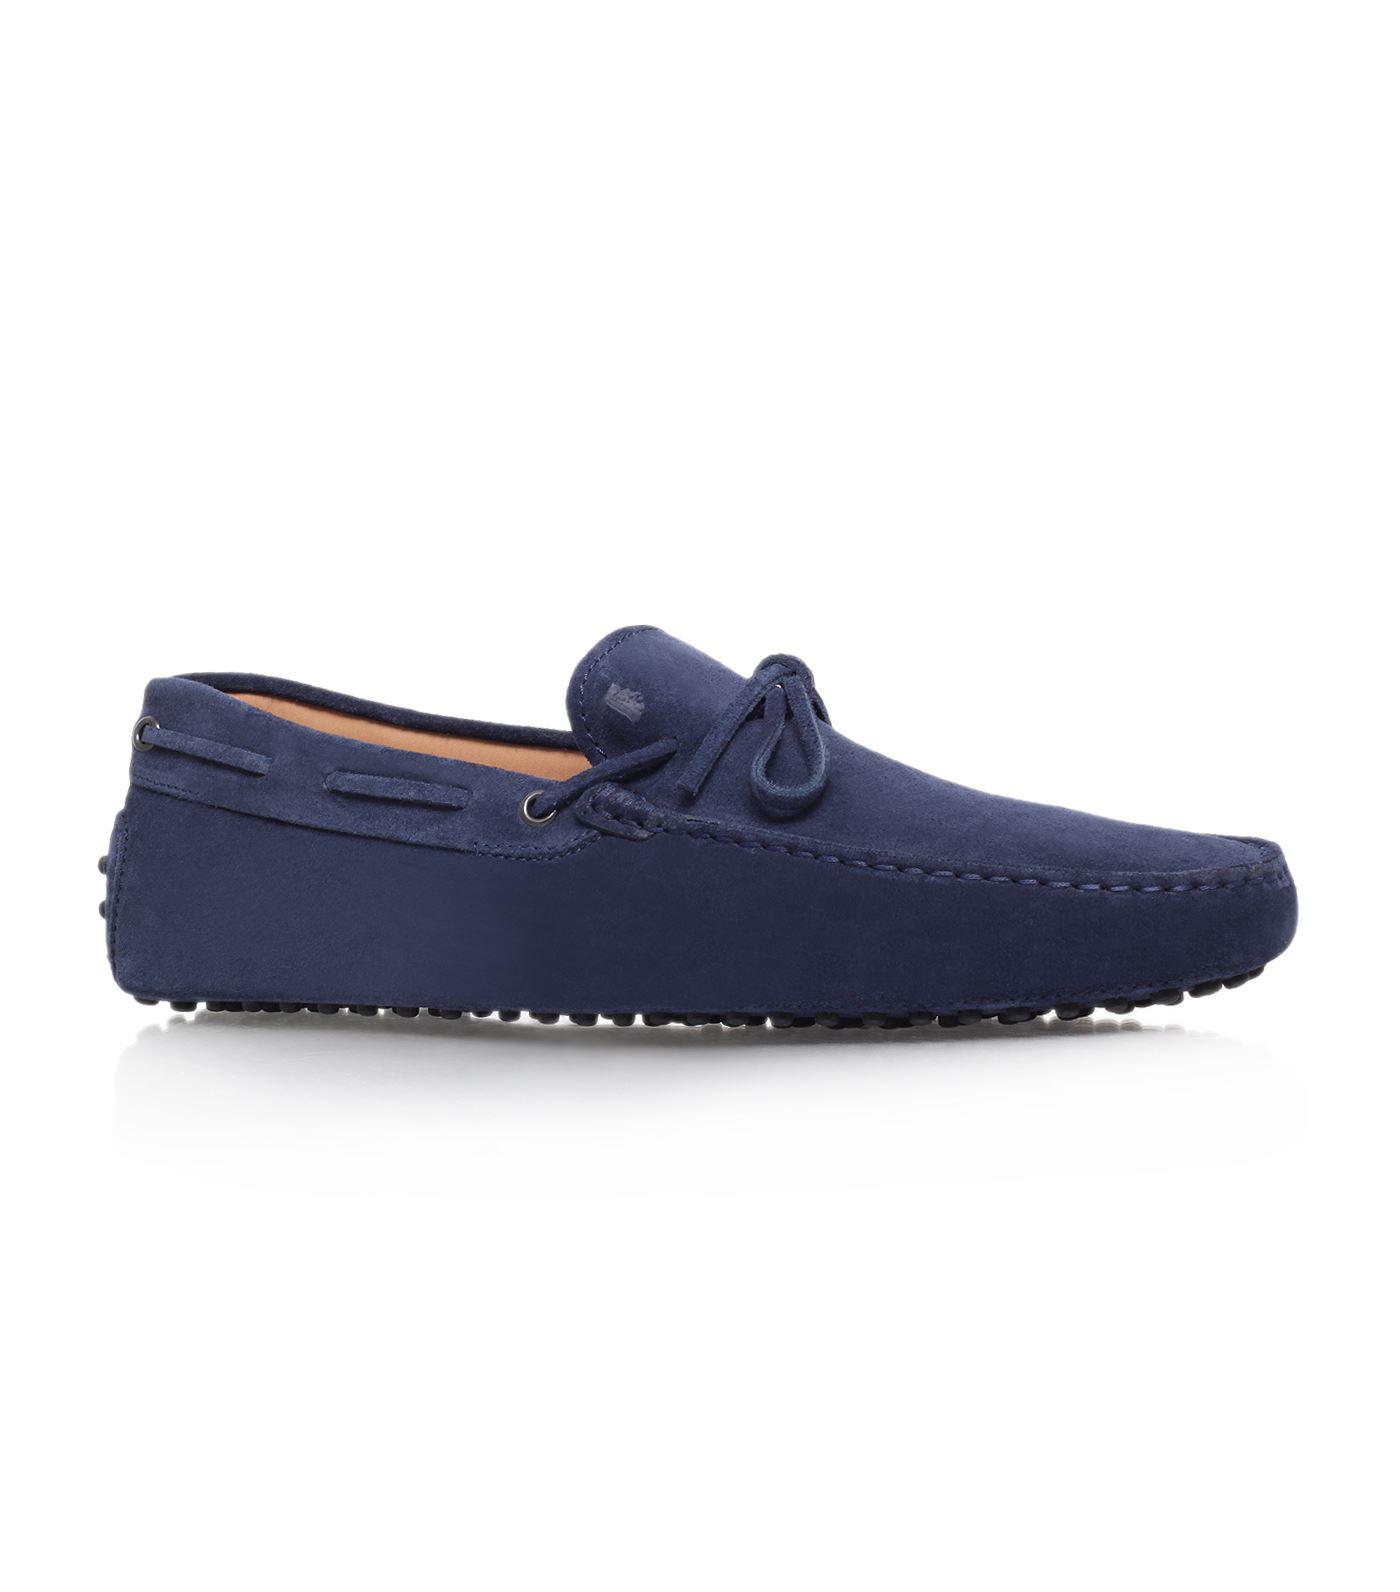 Lyst - Tod'S Laced Gommino Suede Driving Shoes in Blue for Men - Save ...